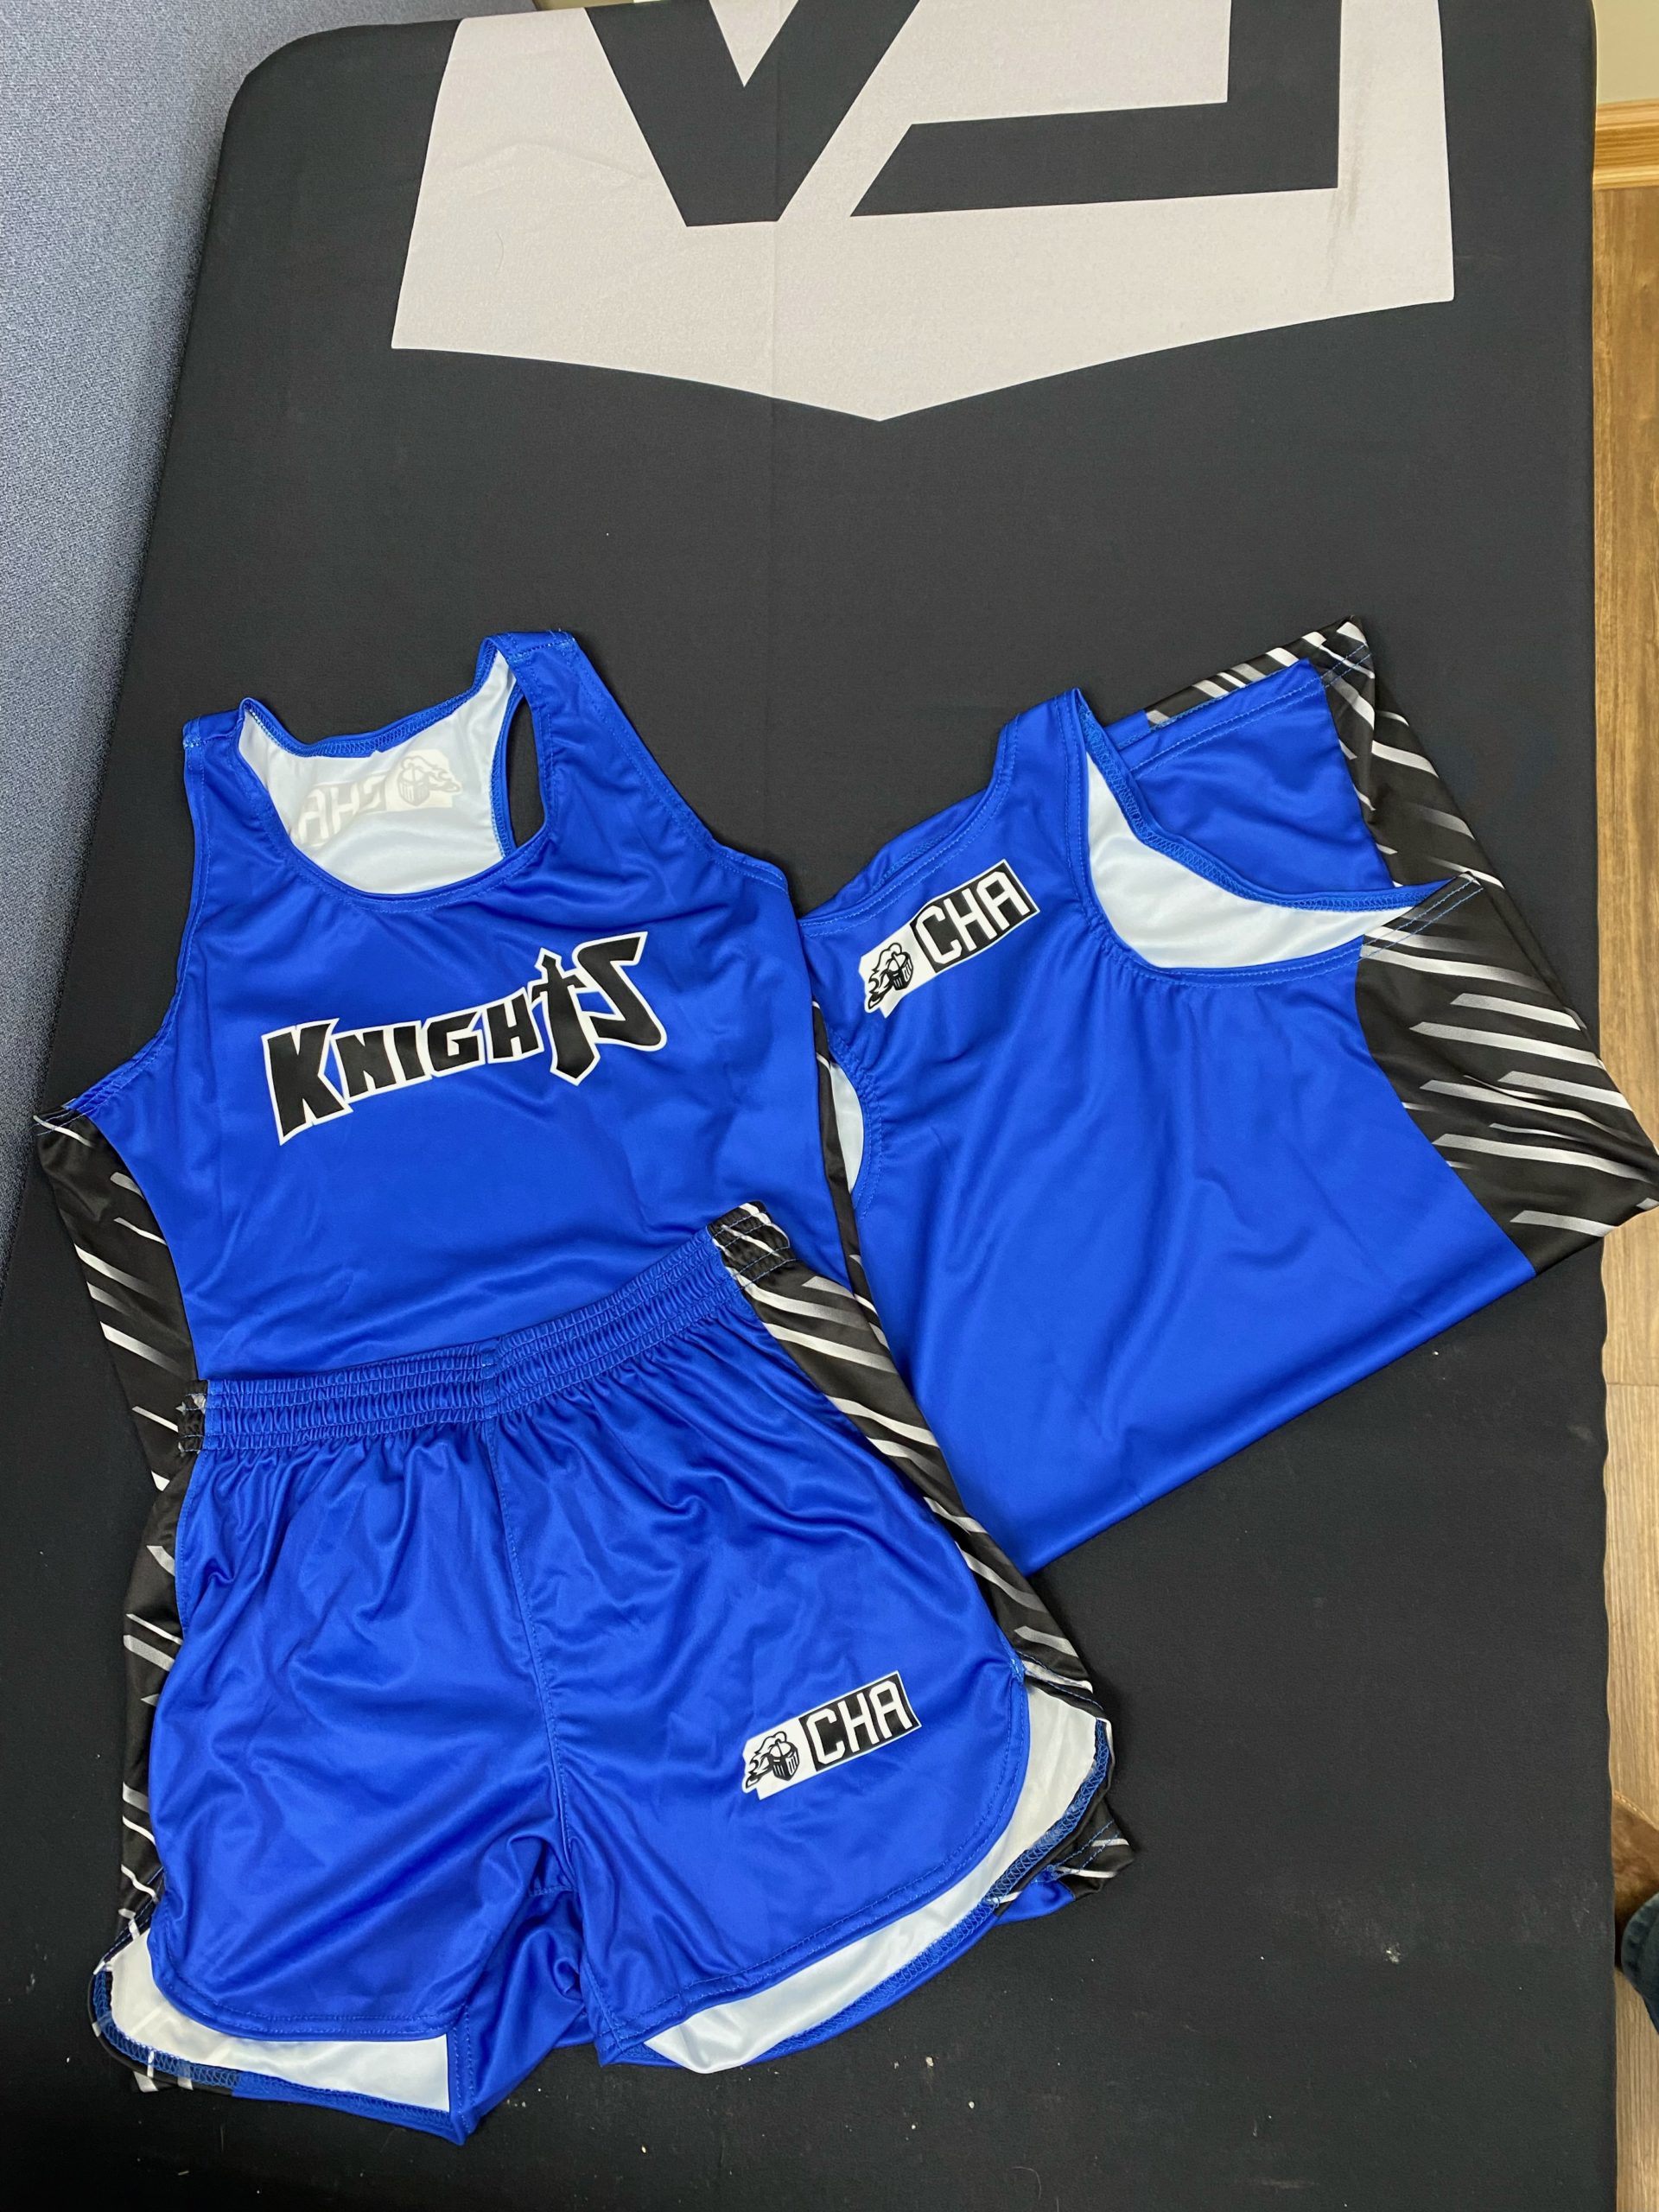 Christian Heritage academy Blue track shorts and tank top